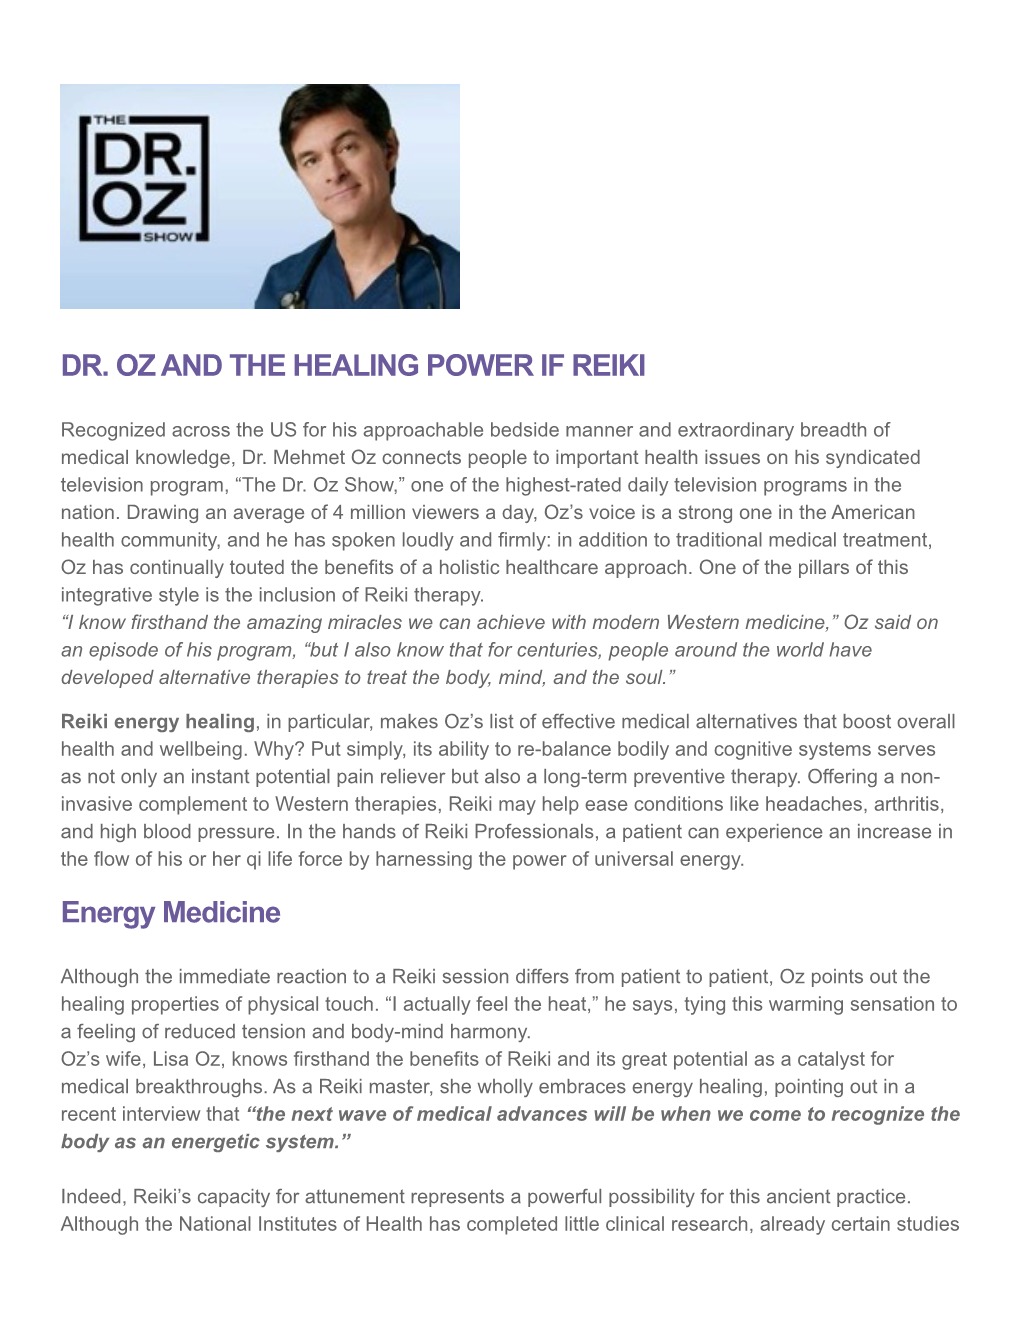 DR. OZ and the HEALING POWER IF REIKI Energy Medicine